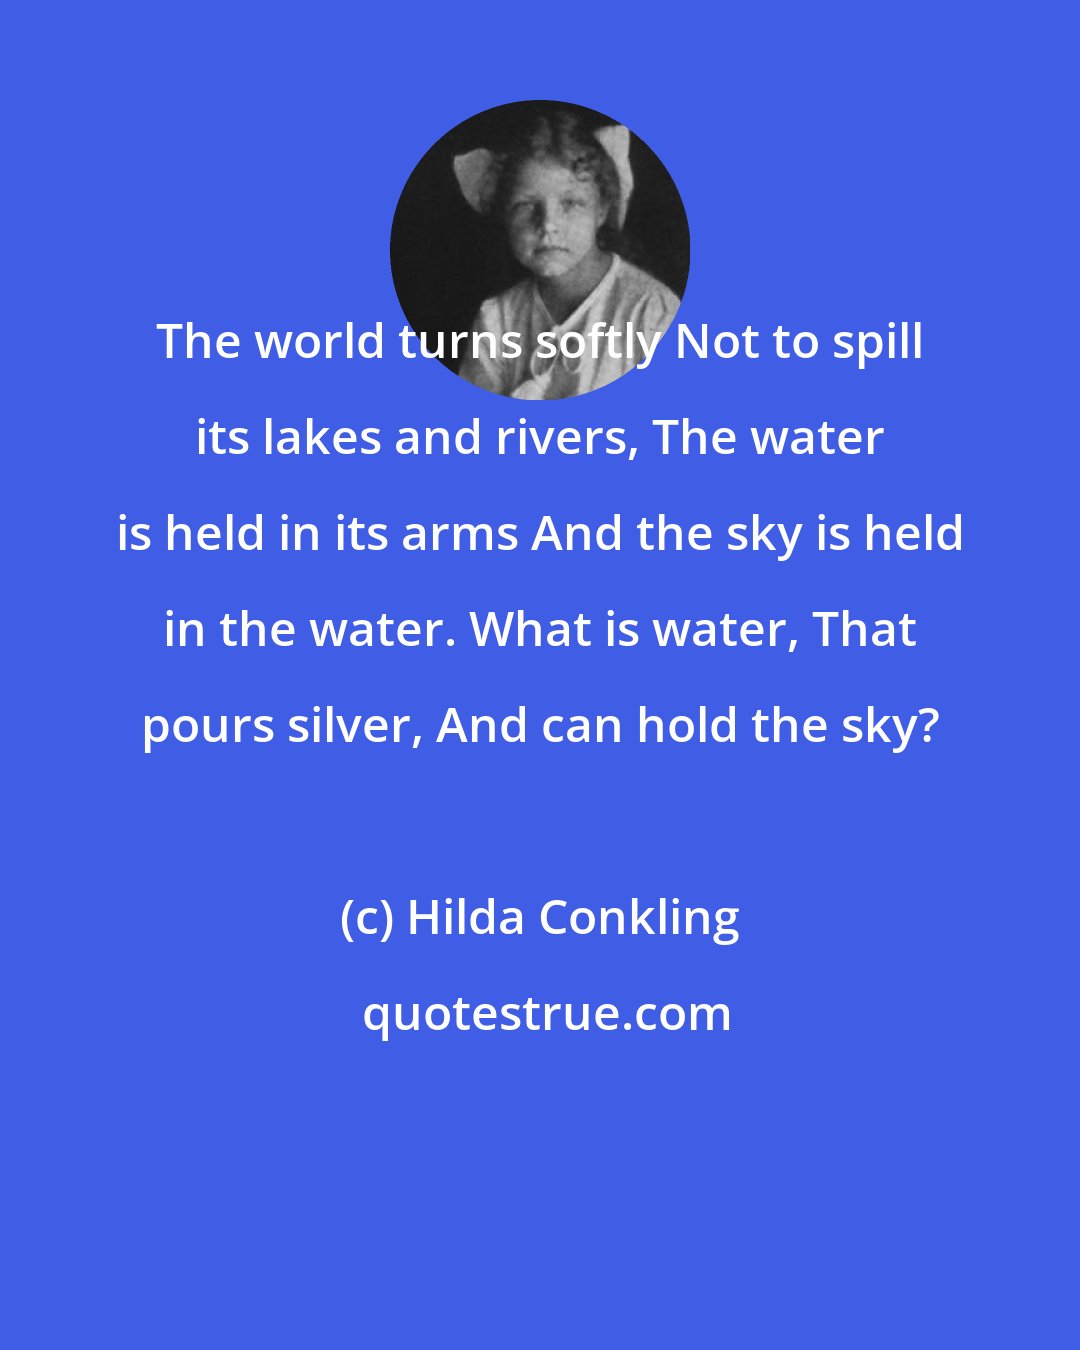 Hilda Conkling: The world turns softly Not to spill its lakes and rivers, The water is held in its arms And the sky is held in the water. What is water, That pours silver, And can hold the sky?